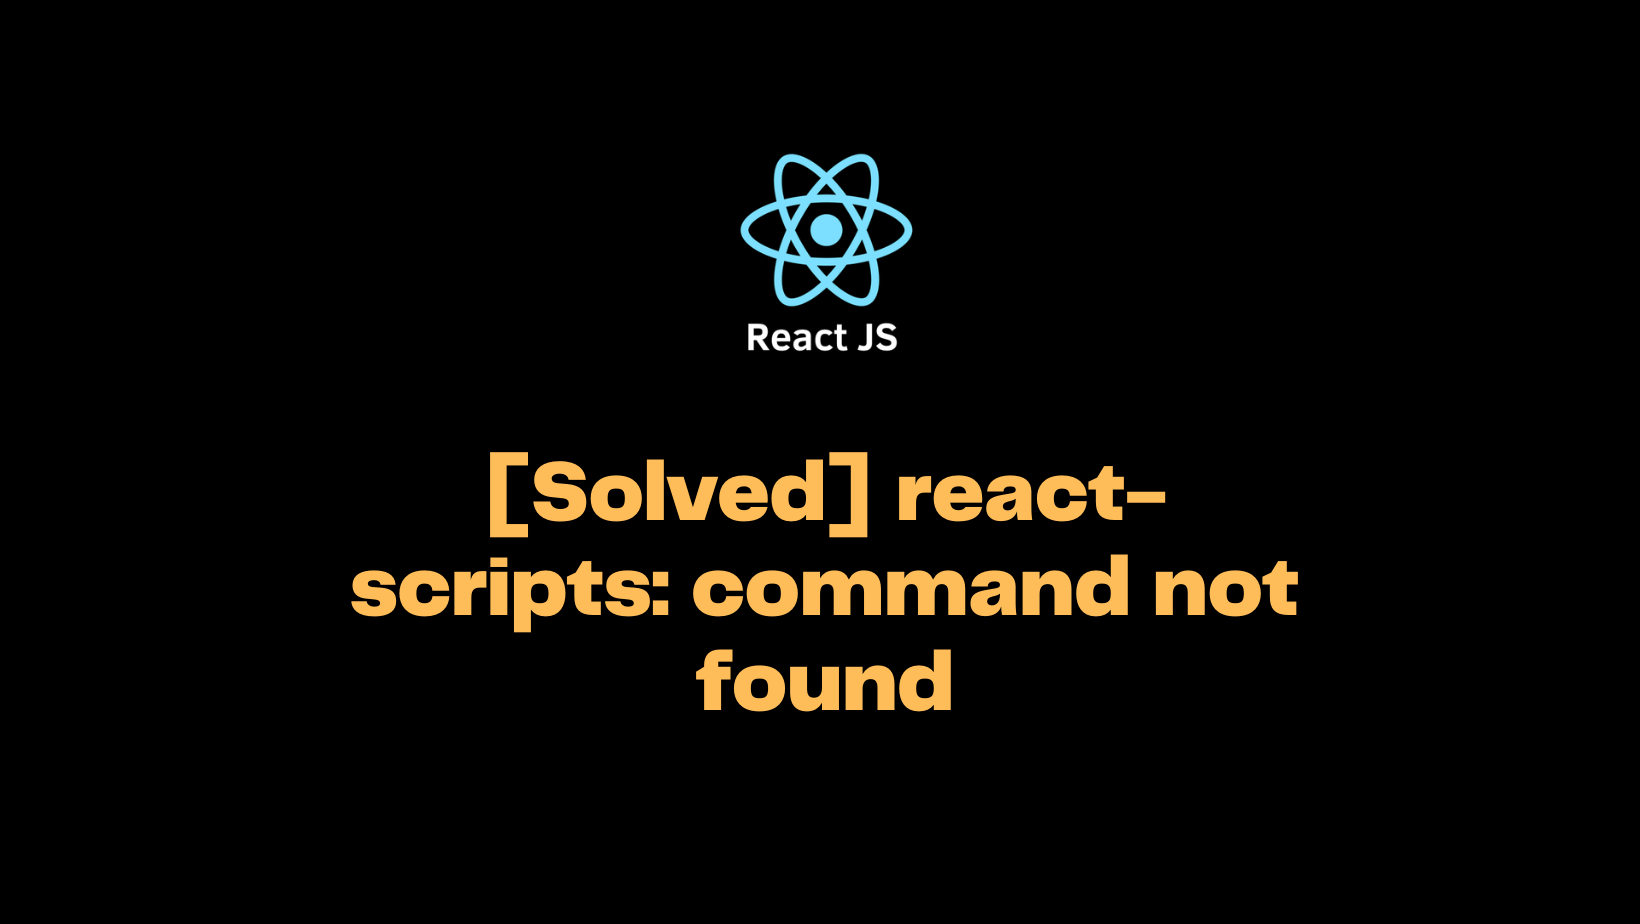 react-scripts: command not found